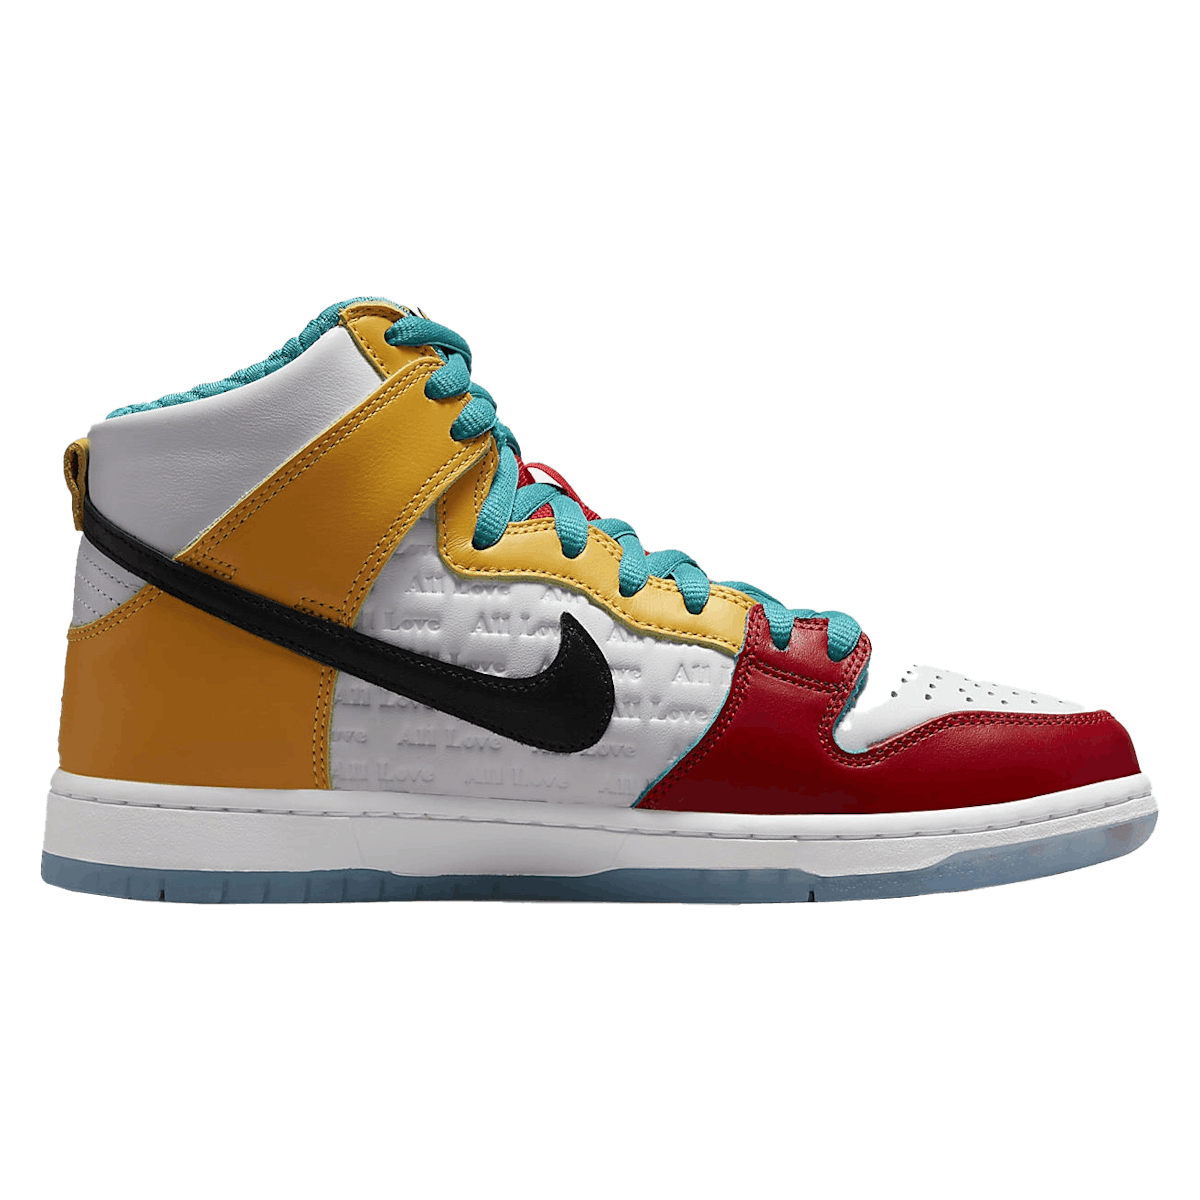 FroSkate x Nike SB Dunk High Pro QS "All Love No Hate"